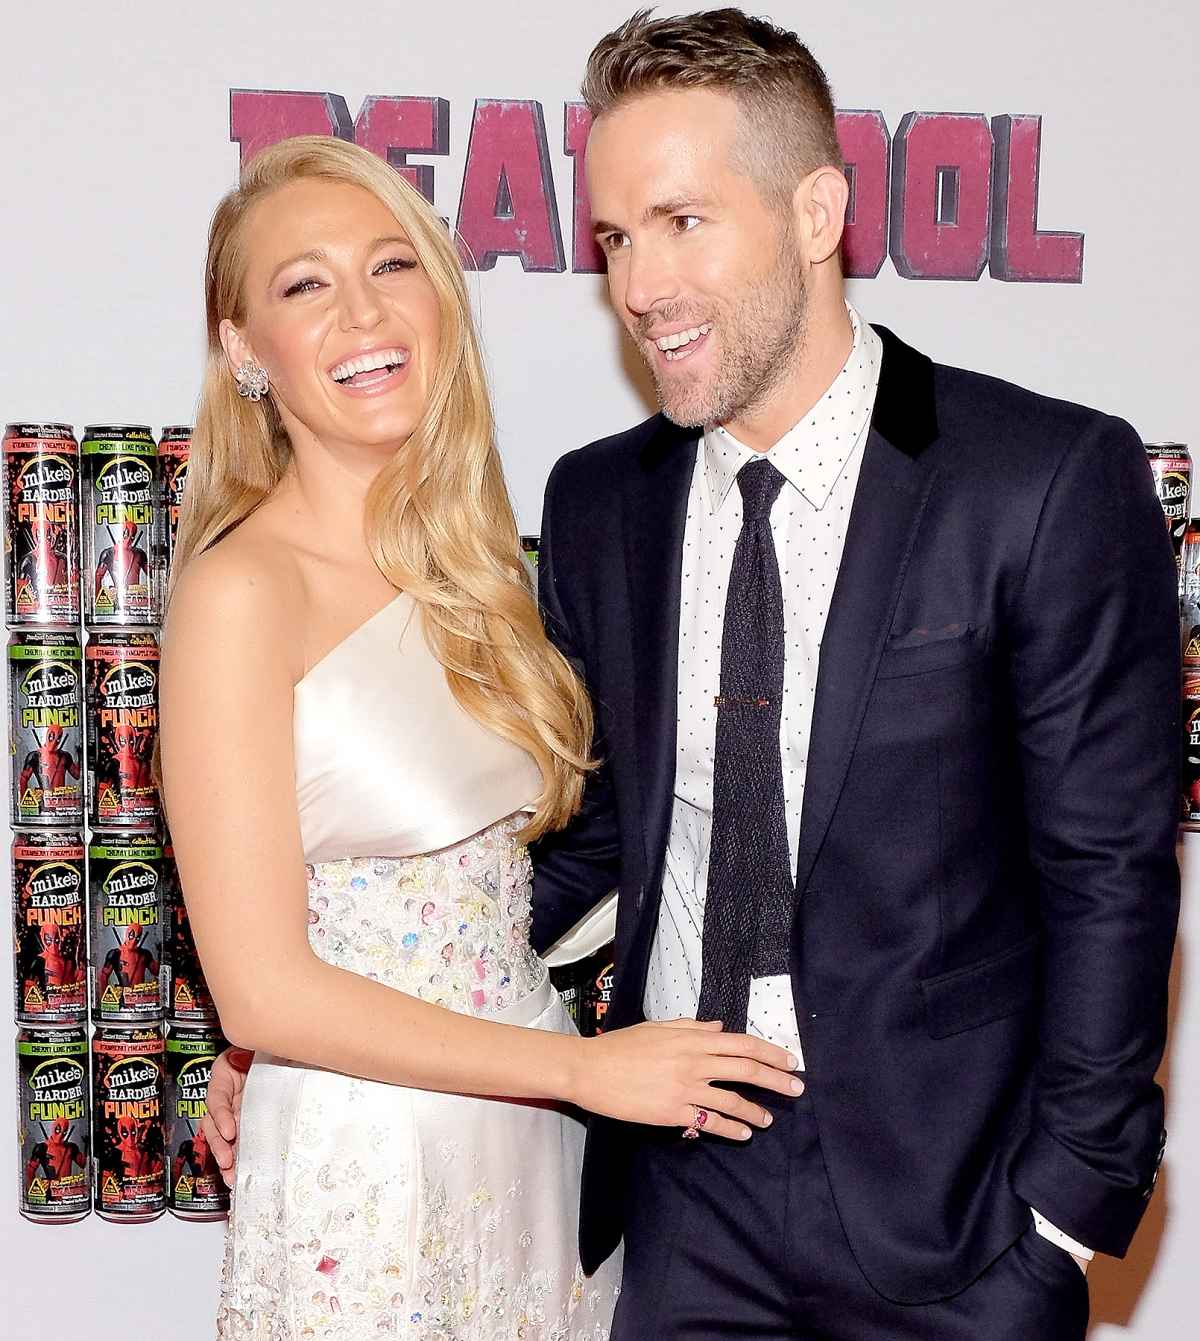 Ryan Reynolds says his wife Blake Lively approves of his bromance